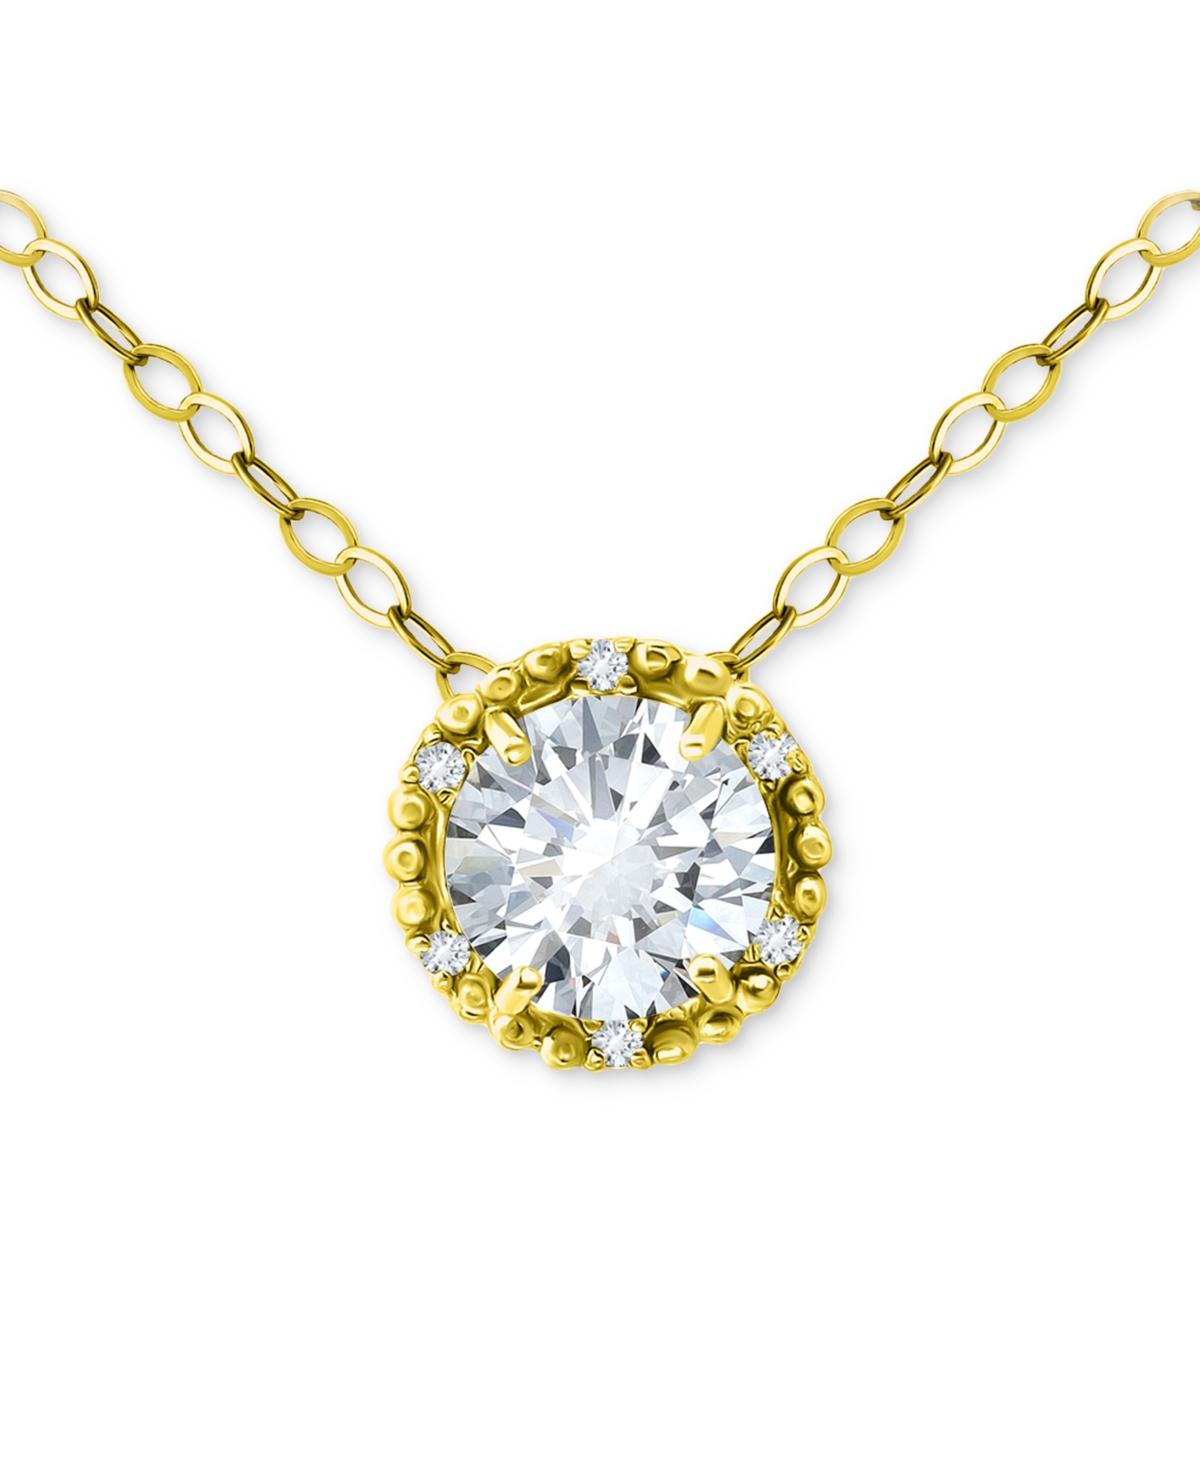 Giani Bernini Cubic Zirconia Halo Pendant Necklace In 18k Gold-plated Sterling Silver, 16" + 2" Extender, Created